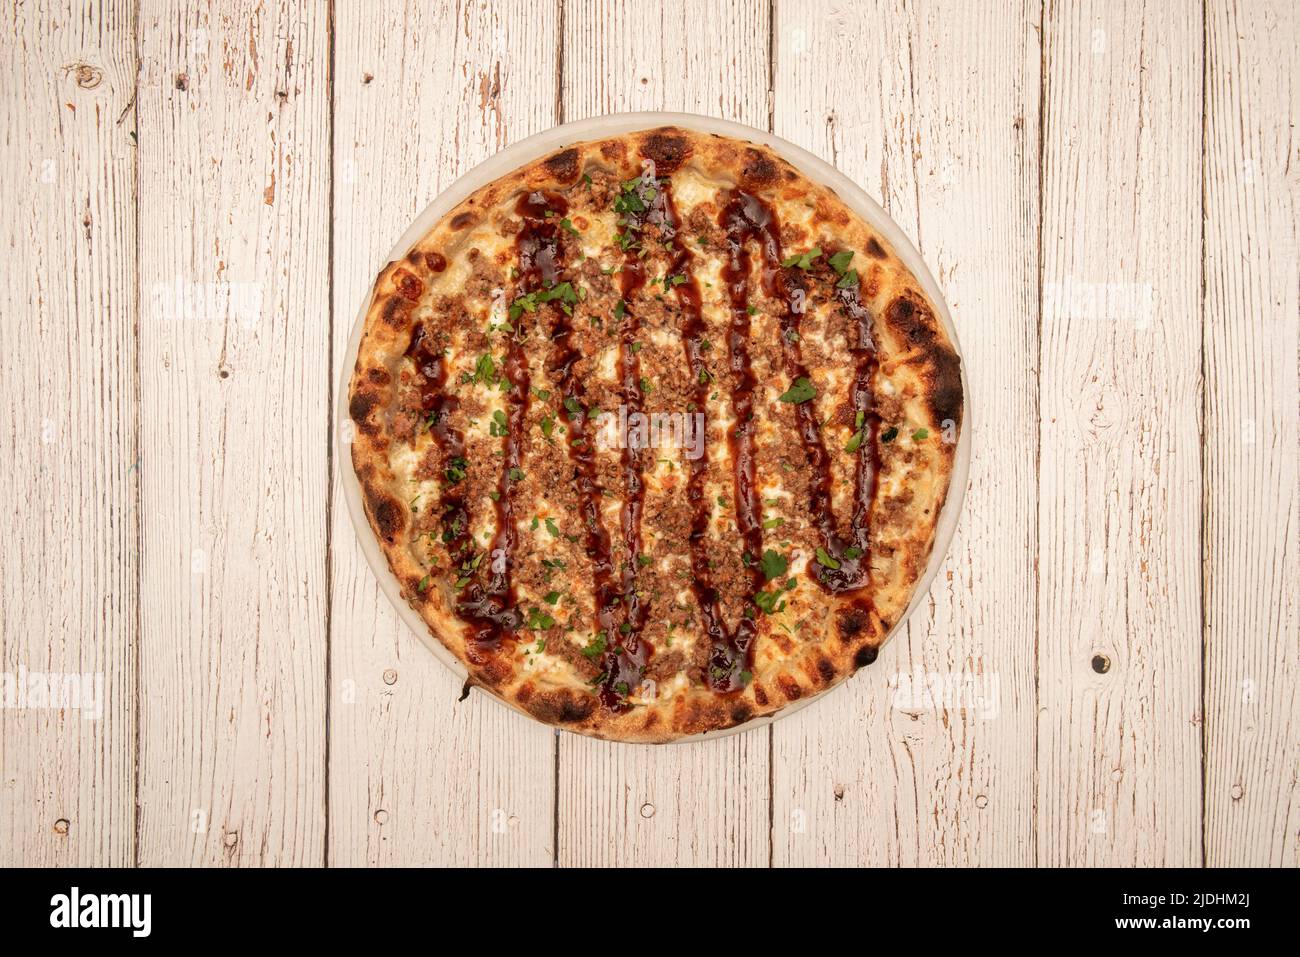 Top view image of bbq pizza, mozzarella cheese, sauce and parsley Stock Photo